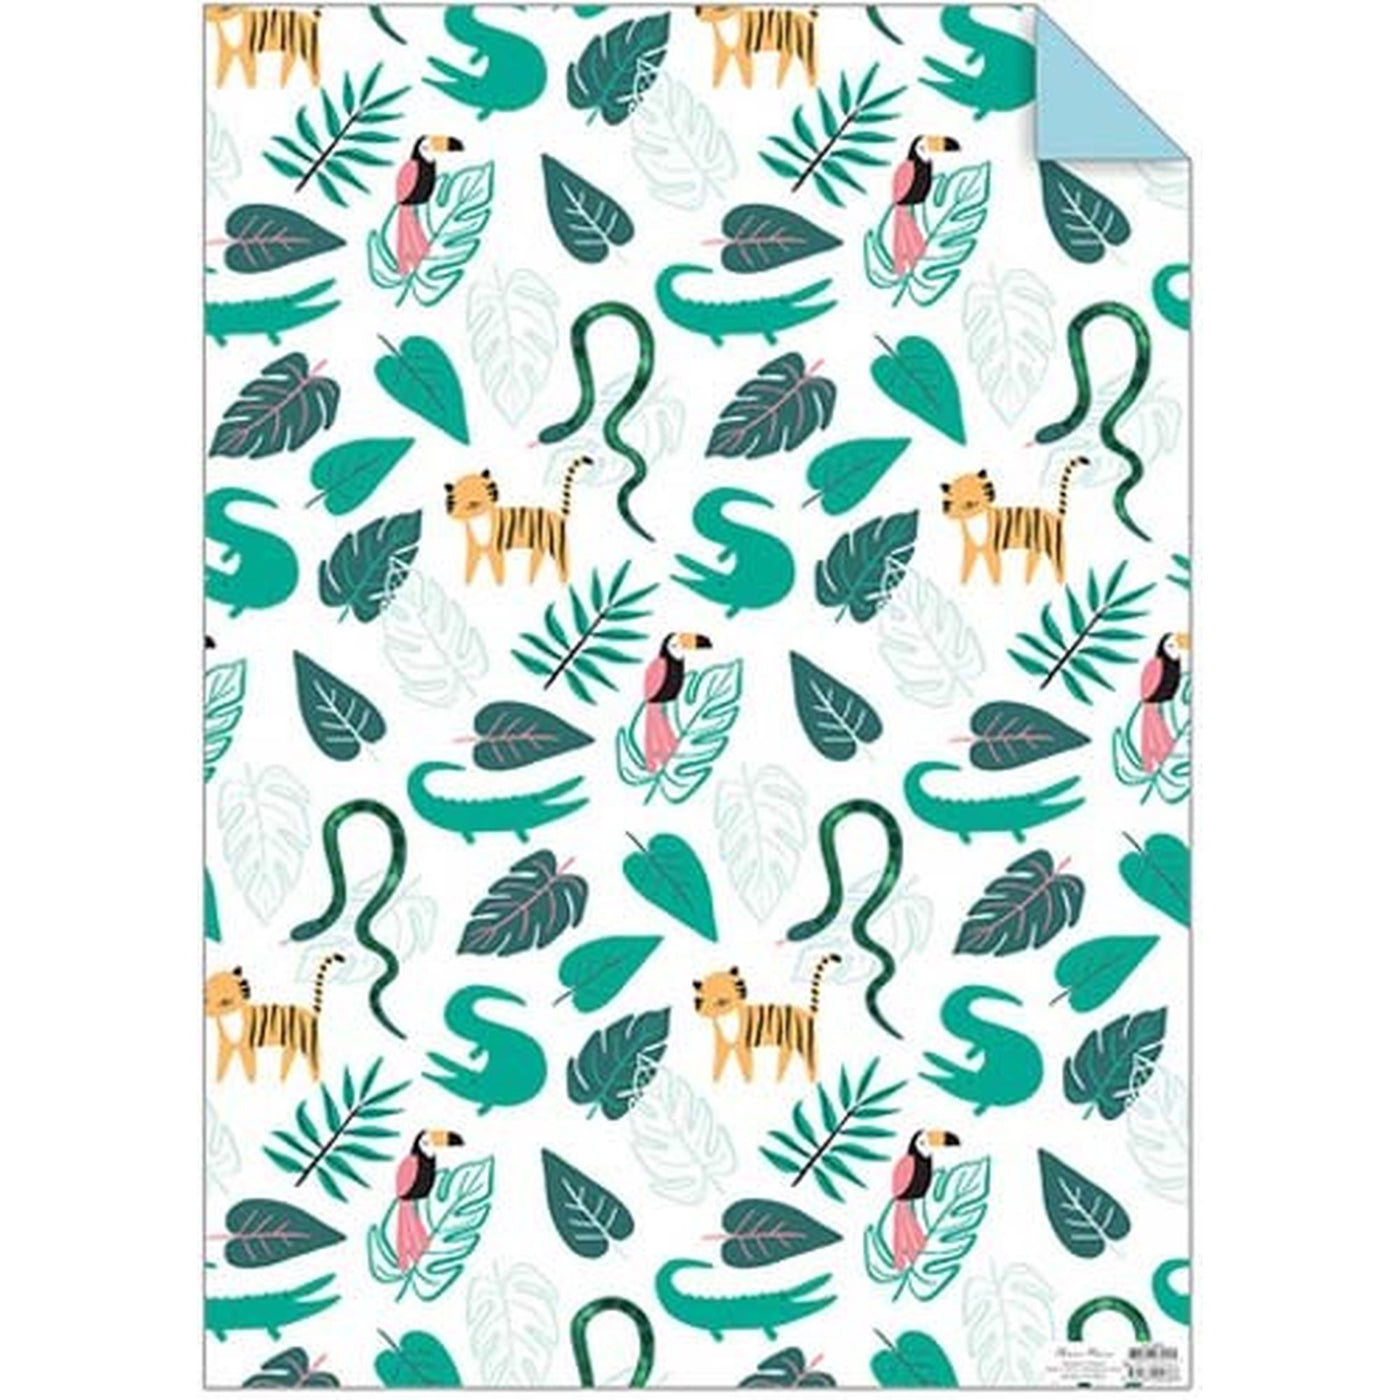 Go Wild Wrapping Paper - Whoot Party Boutique